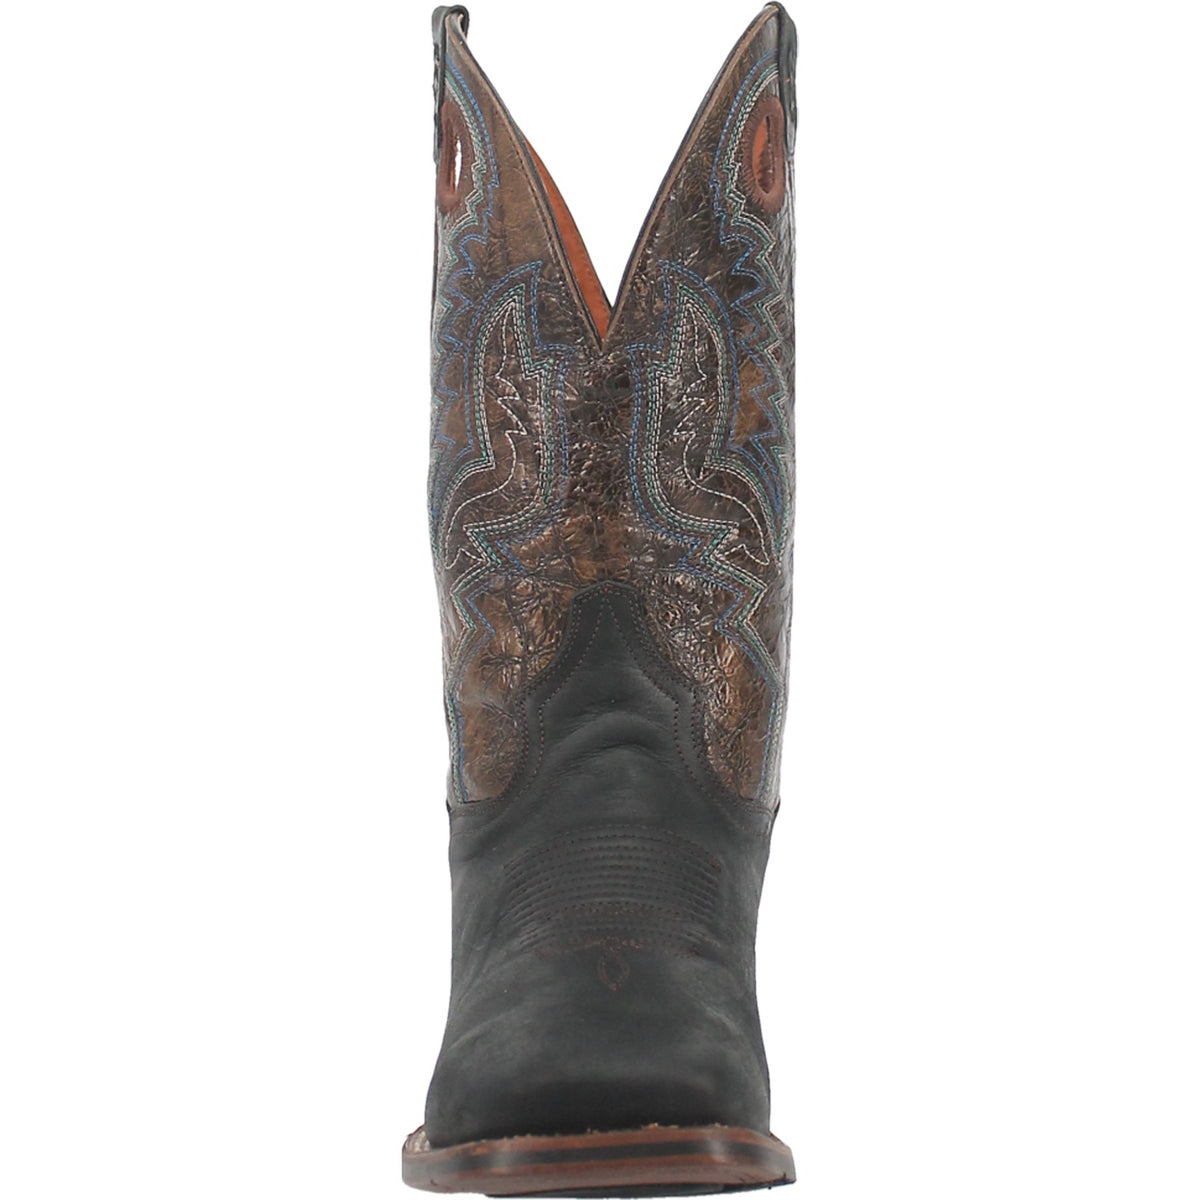 DEUCE LEATHER BOOT Cover